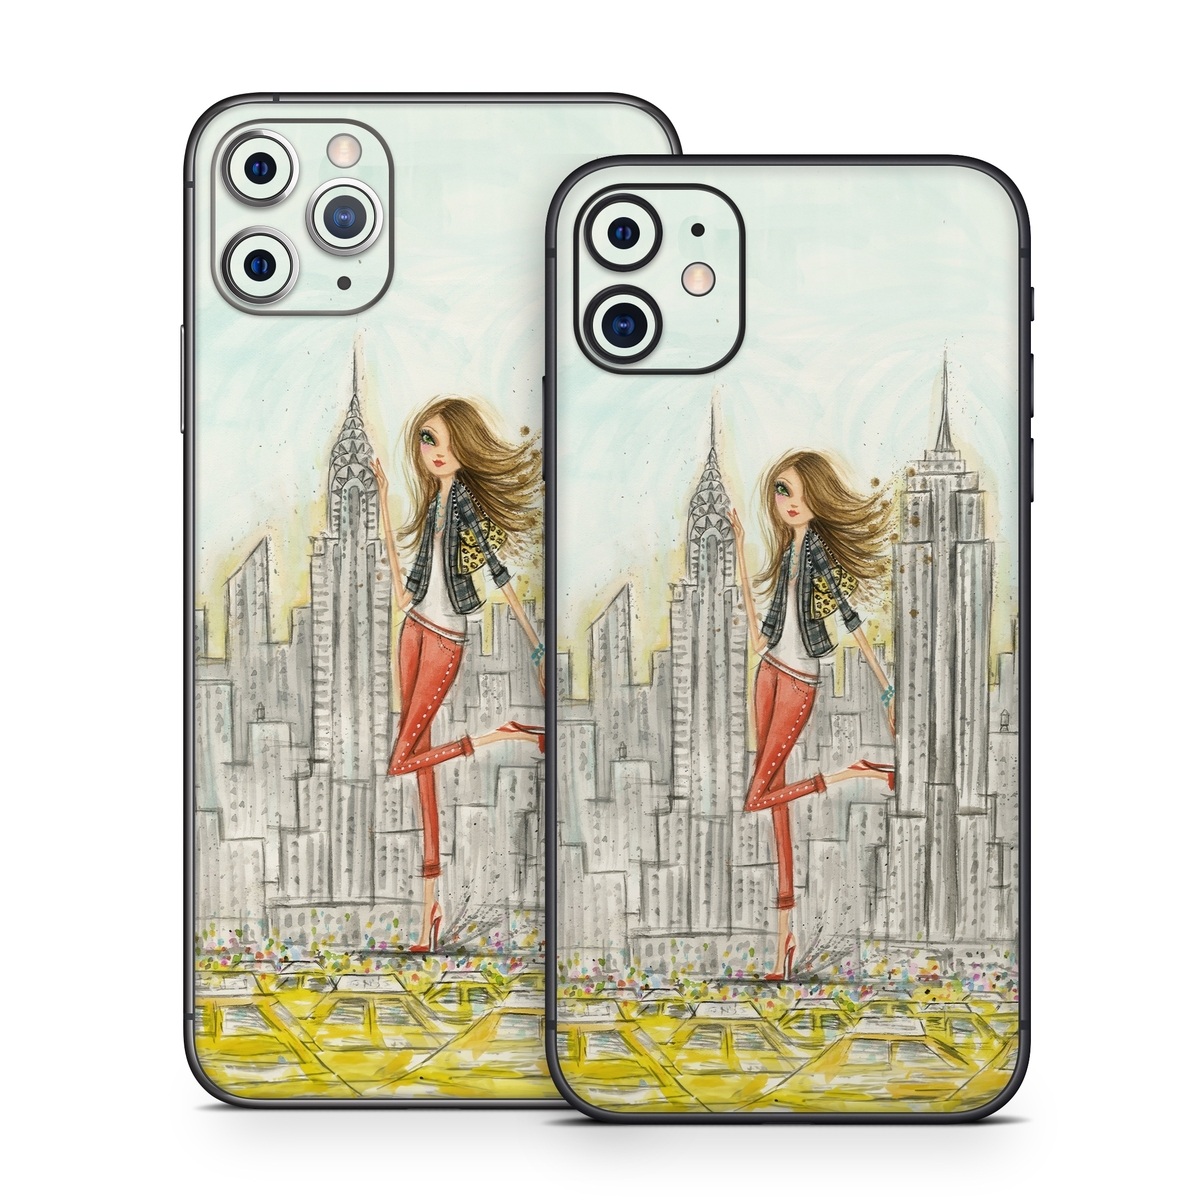 iPhone 11 Skin design of Human settlement, Fashion illustration, Illustration, City, Art, Architecture, Drawing, Fictional character with gray, green, black, red colors